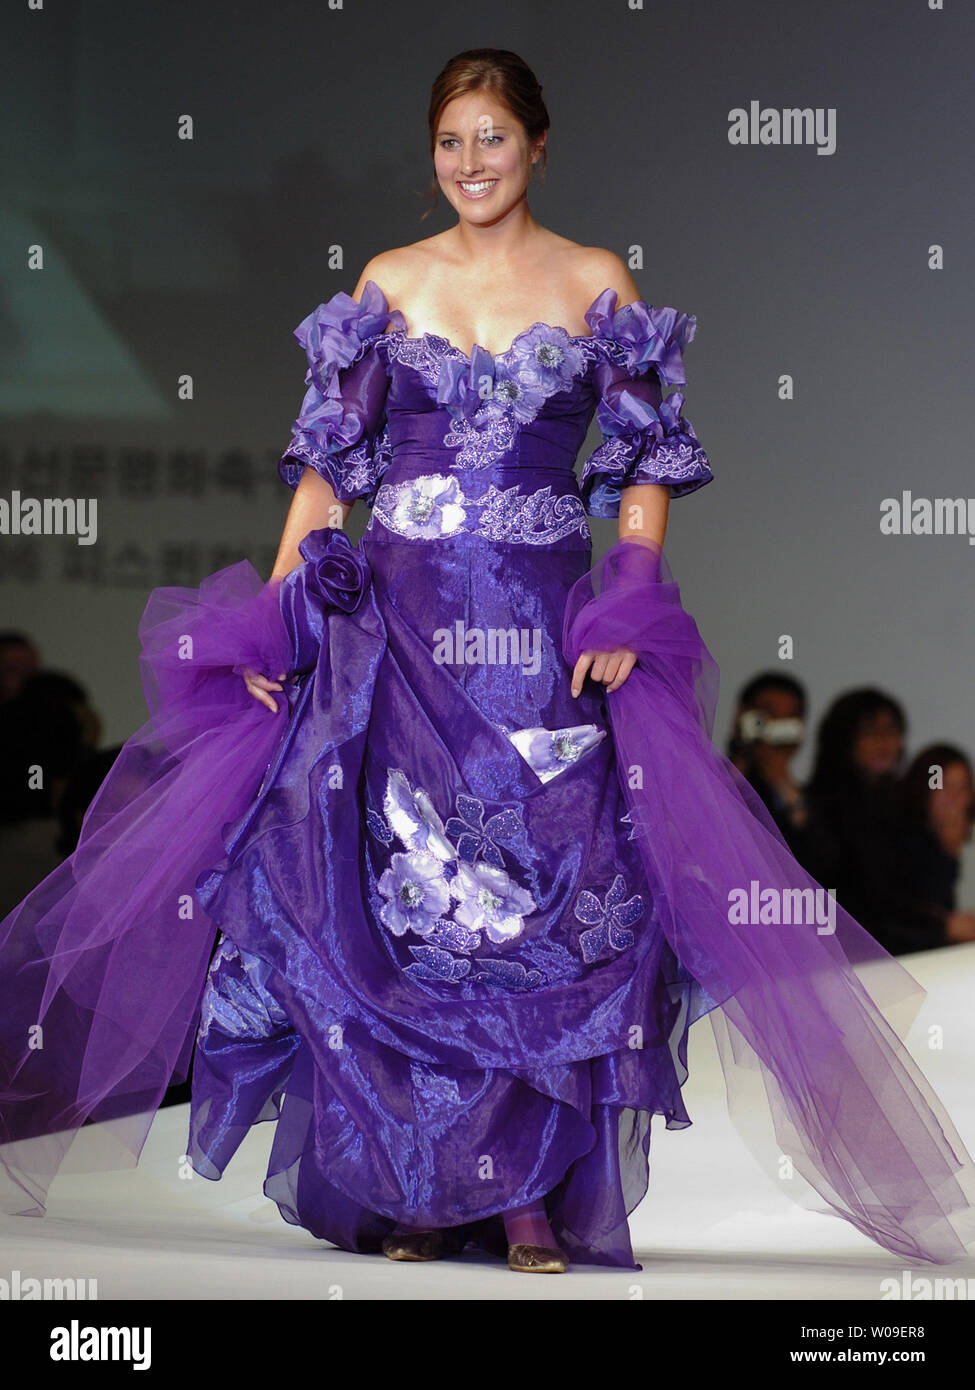 Randee Hermus, a defender on Canada's women's national team, walks down the catwalk wearing a creation by Andre Kim during a fashion show as part of the opening ceremony of the 2006 Peace Queen Cup (soccer) in Seoul, South Korea on October 27 2006.    (UPI Photo/Keizo Mori) Stock Photo